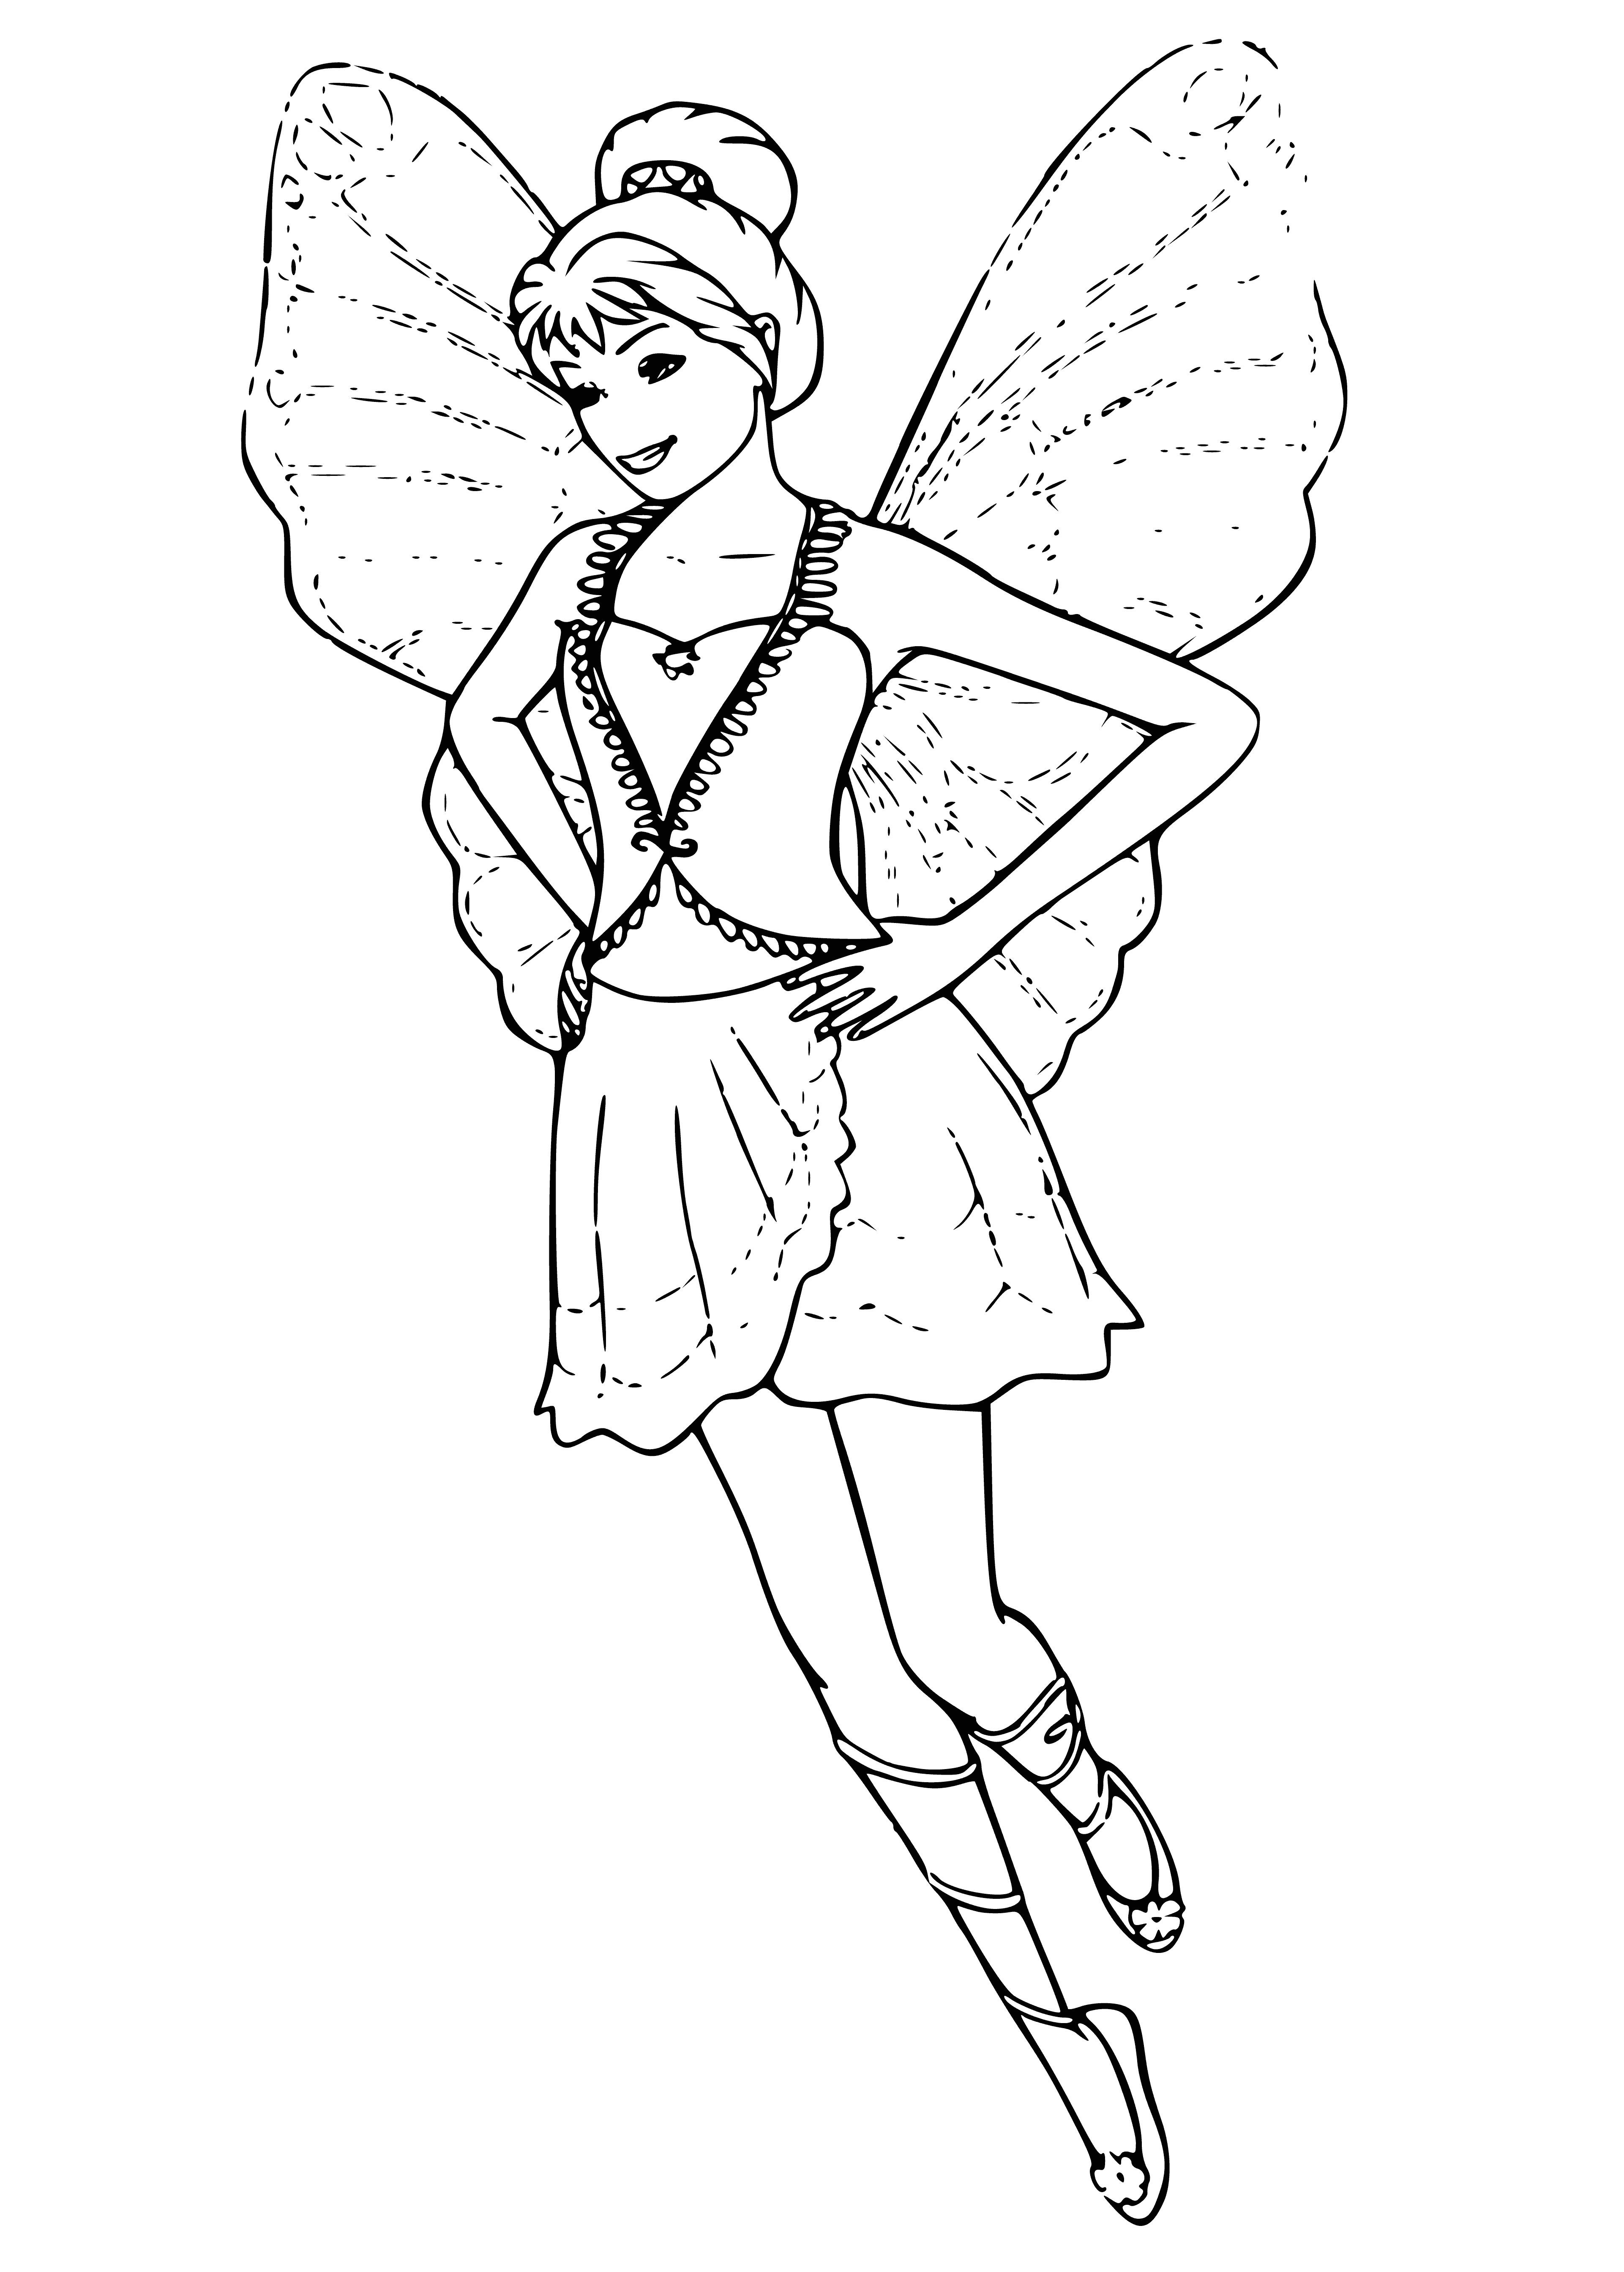 coloring page: Fairy Barbie: Long blonde hair in ponytail, blue eyes, pink dress & white undershirt, clear sparkly wings & a crown, wand in hand.